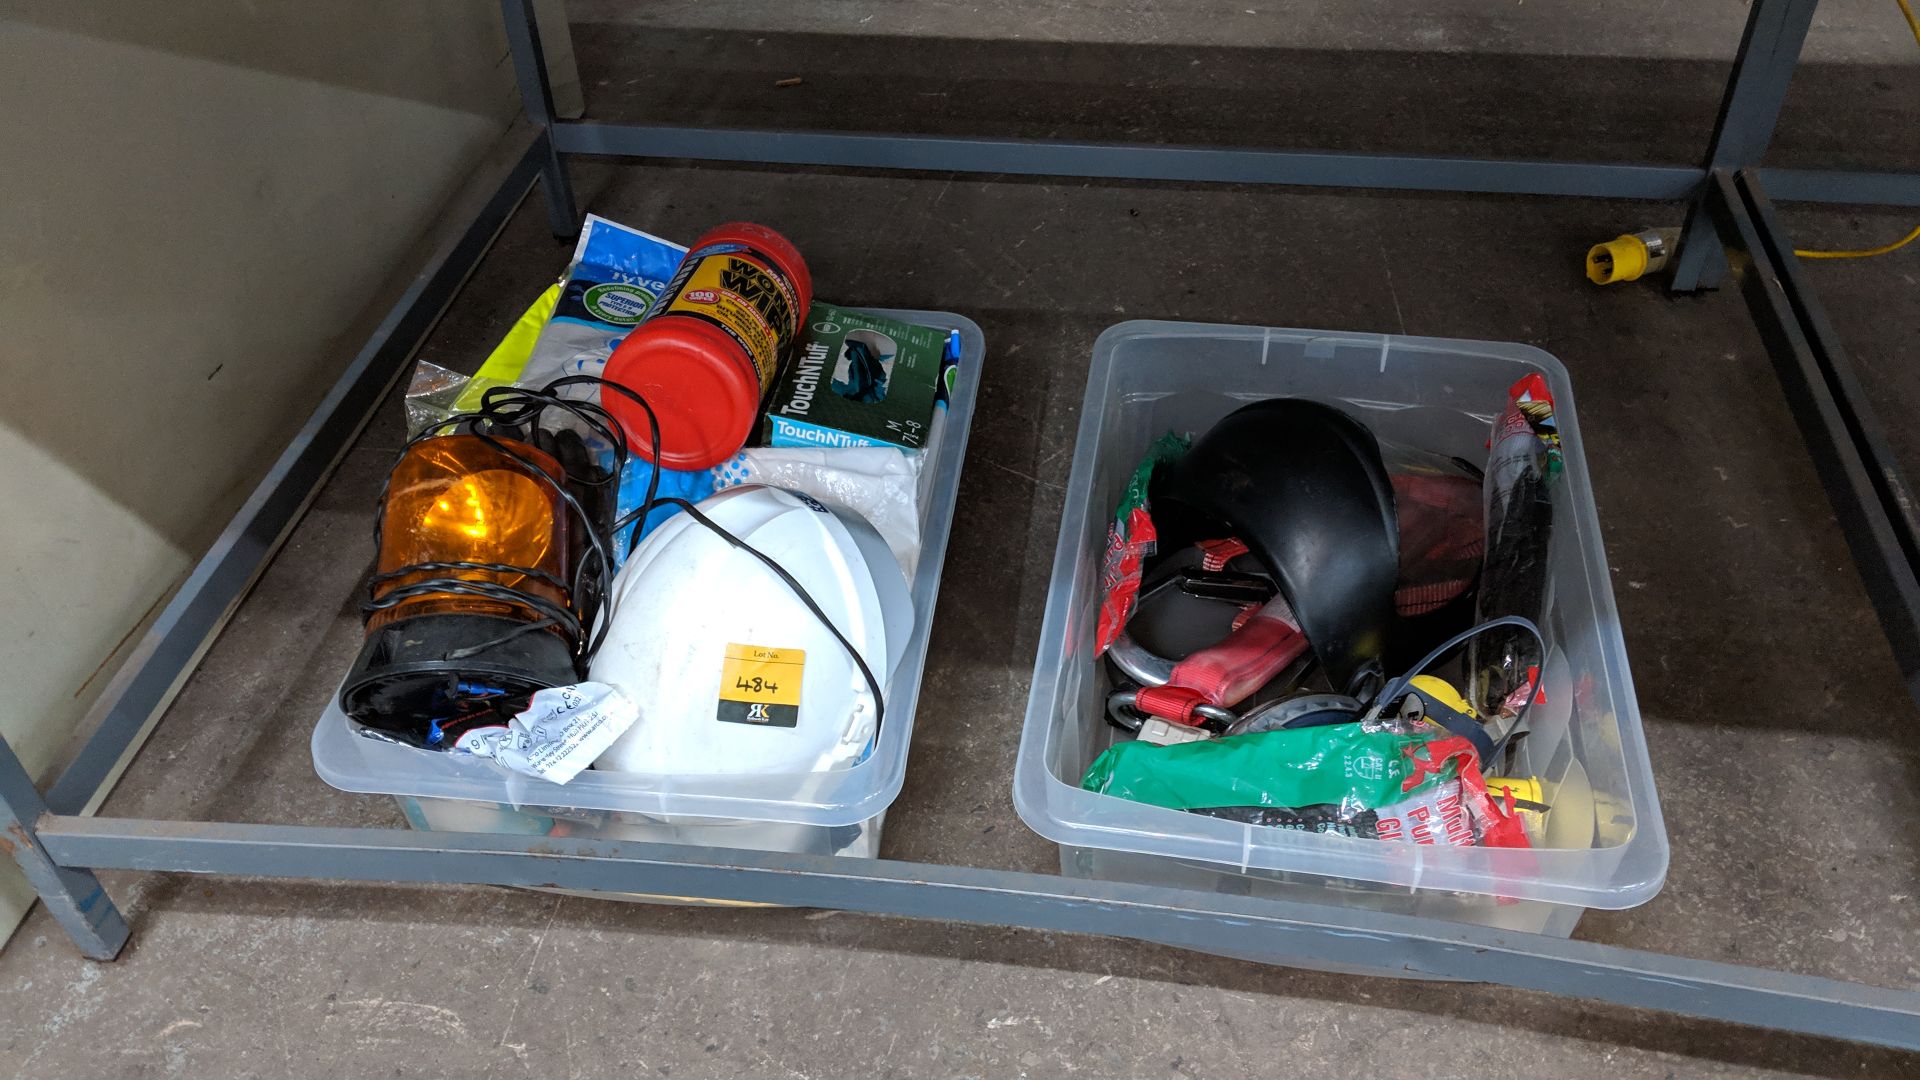 Contents of 2 crates of PPE, safety equipment and more - crates excluded This is one of a large